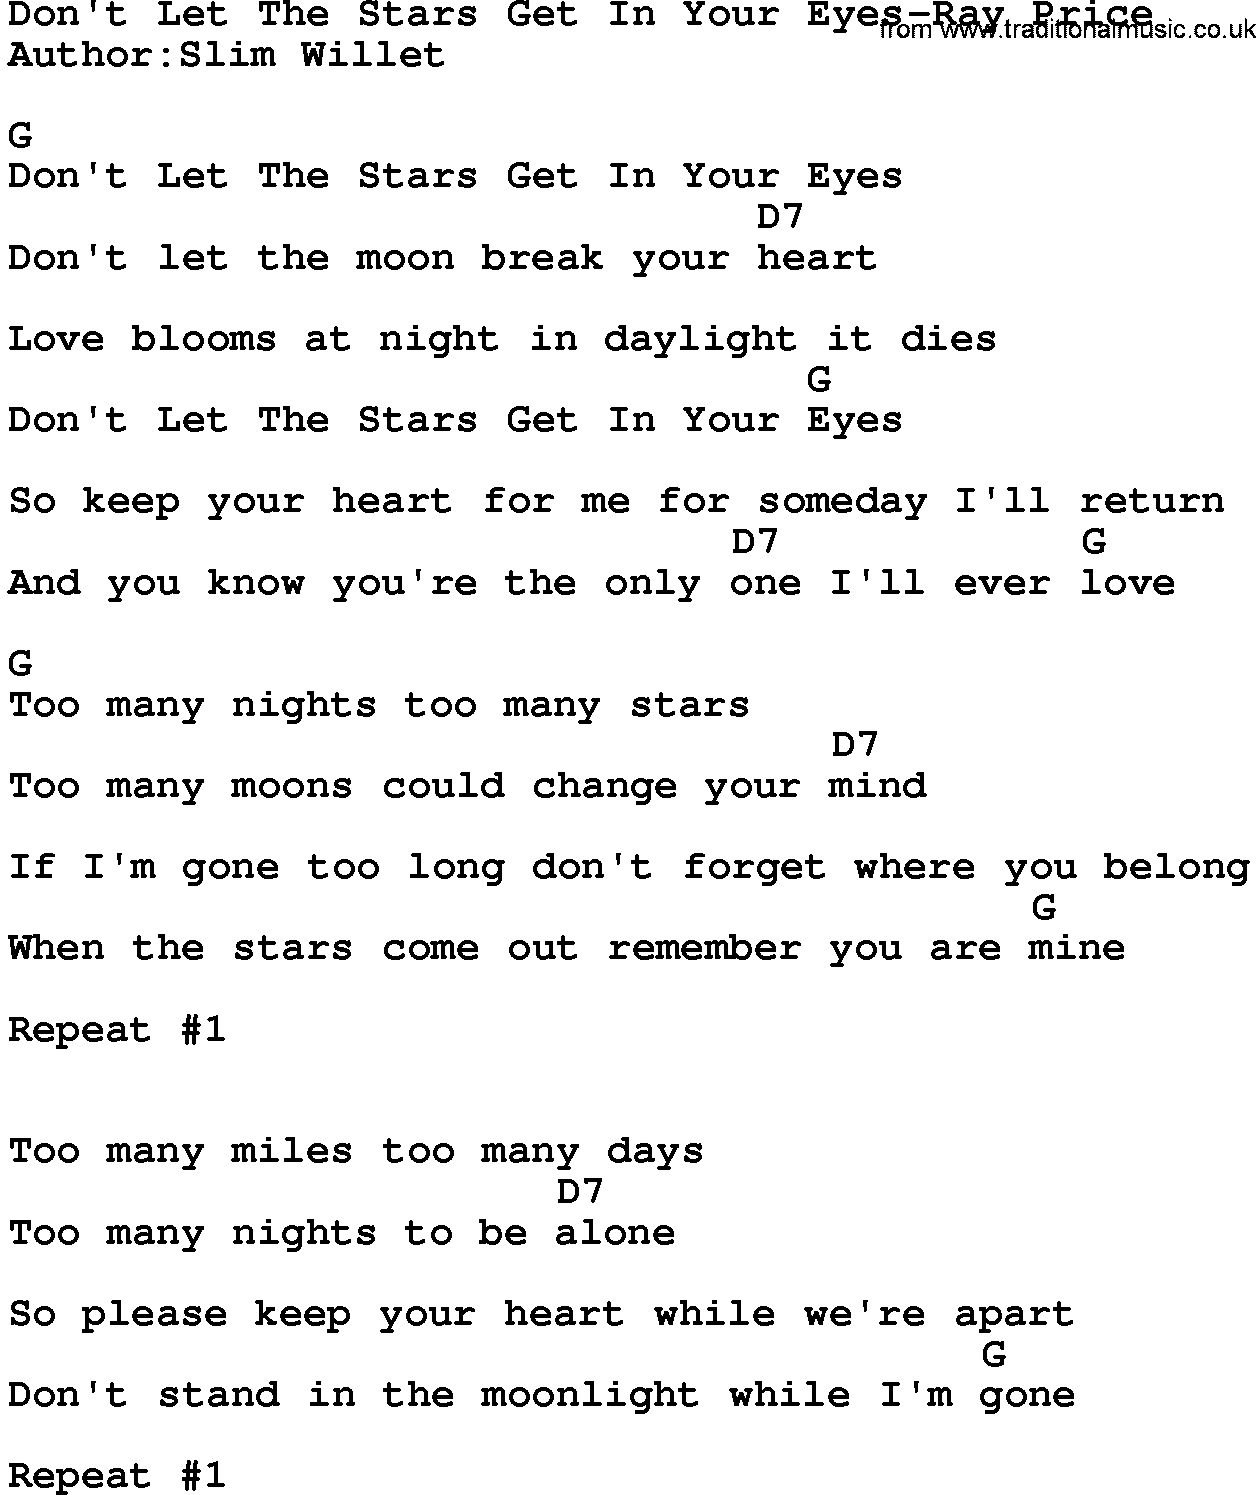 Country music song: Don't Let The Stars Get In Your Eyes-Ray Price lyrics and chords